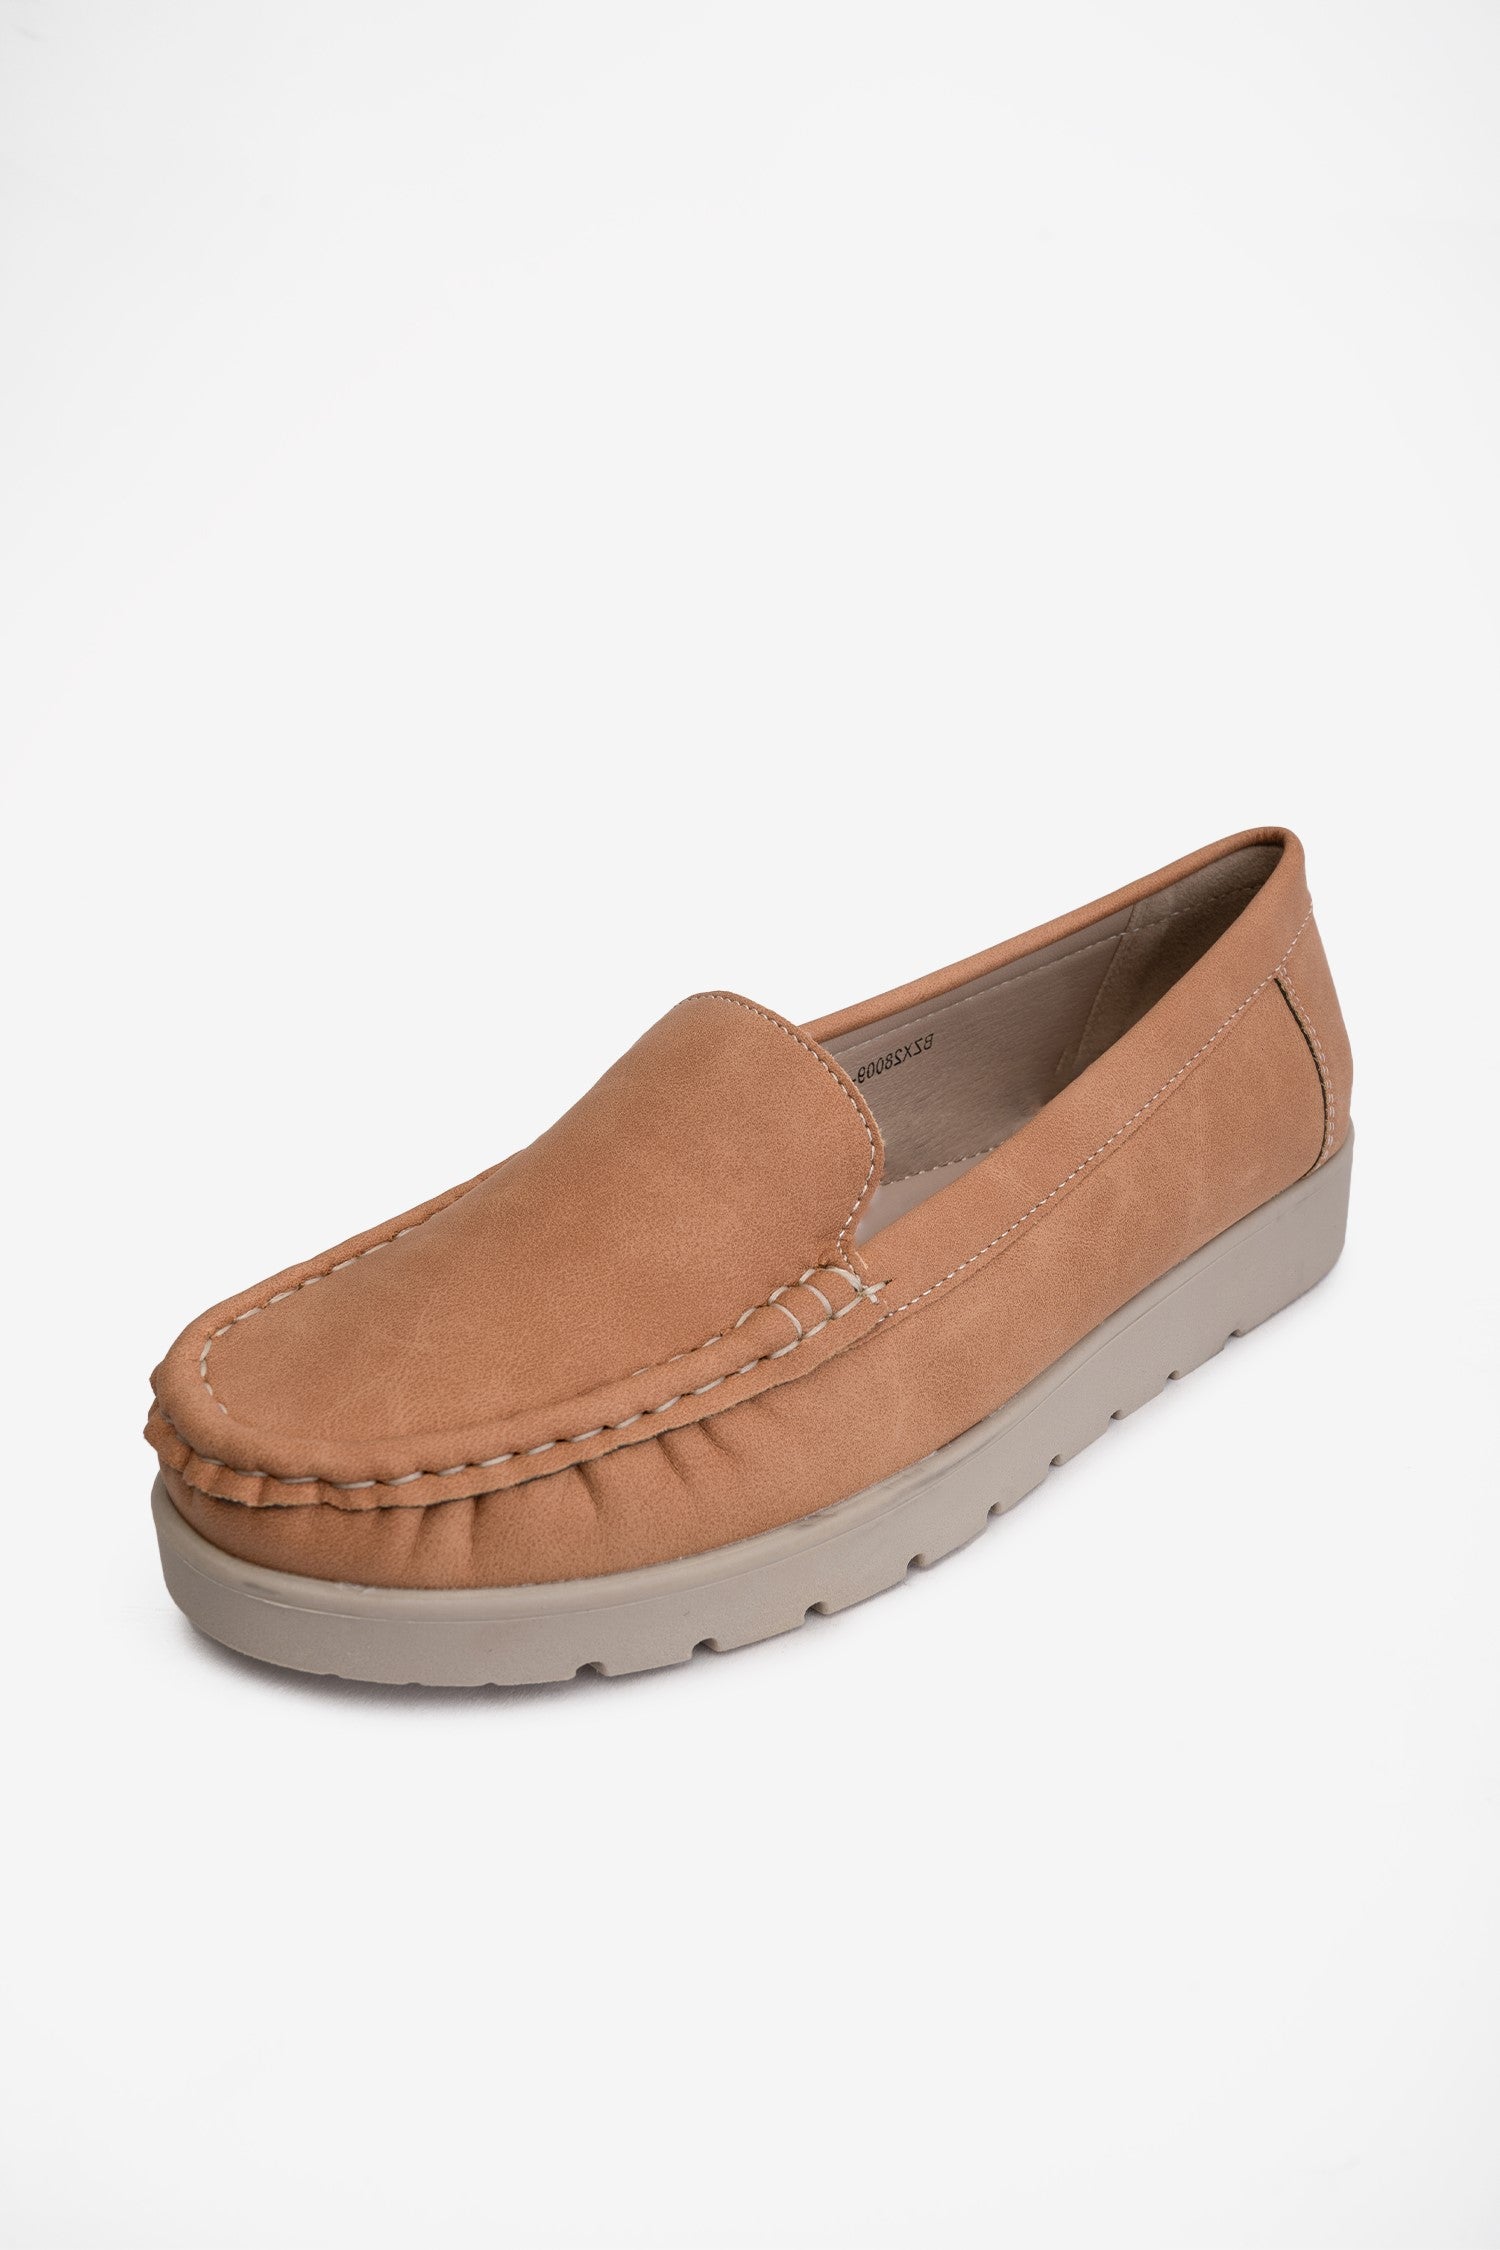 Mocasín Mujer Camel María Chinitown Chinitown